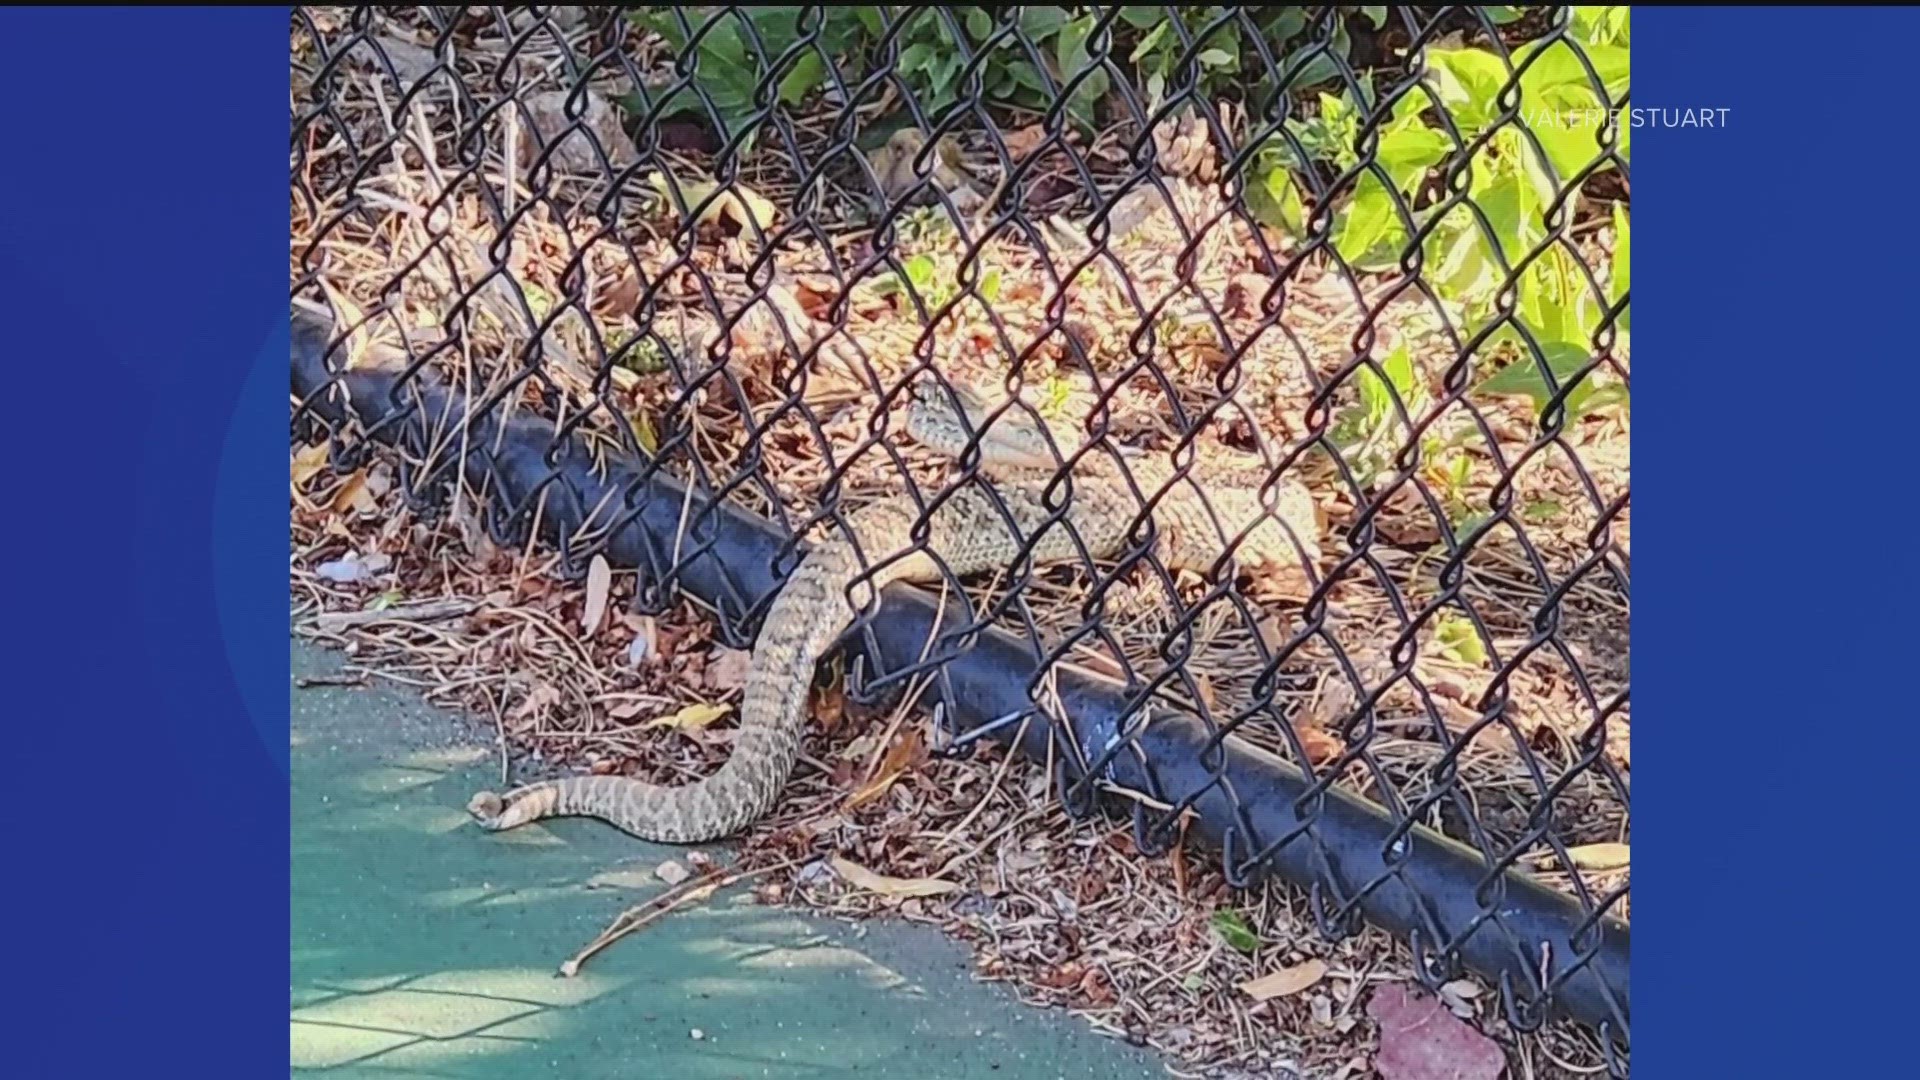 Valerie Stuart was playing pickleball with friends when a large rattlesnake interrupted.